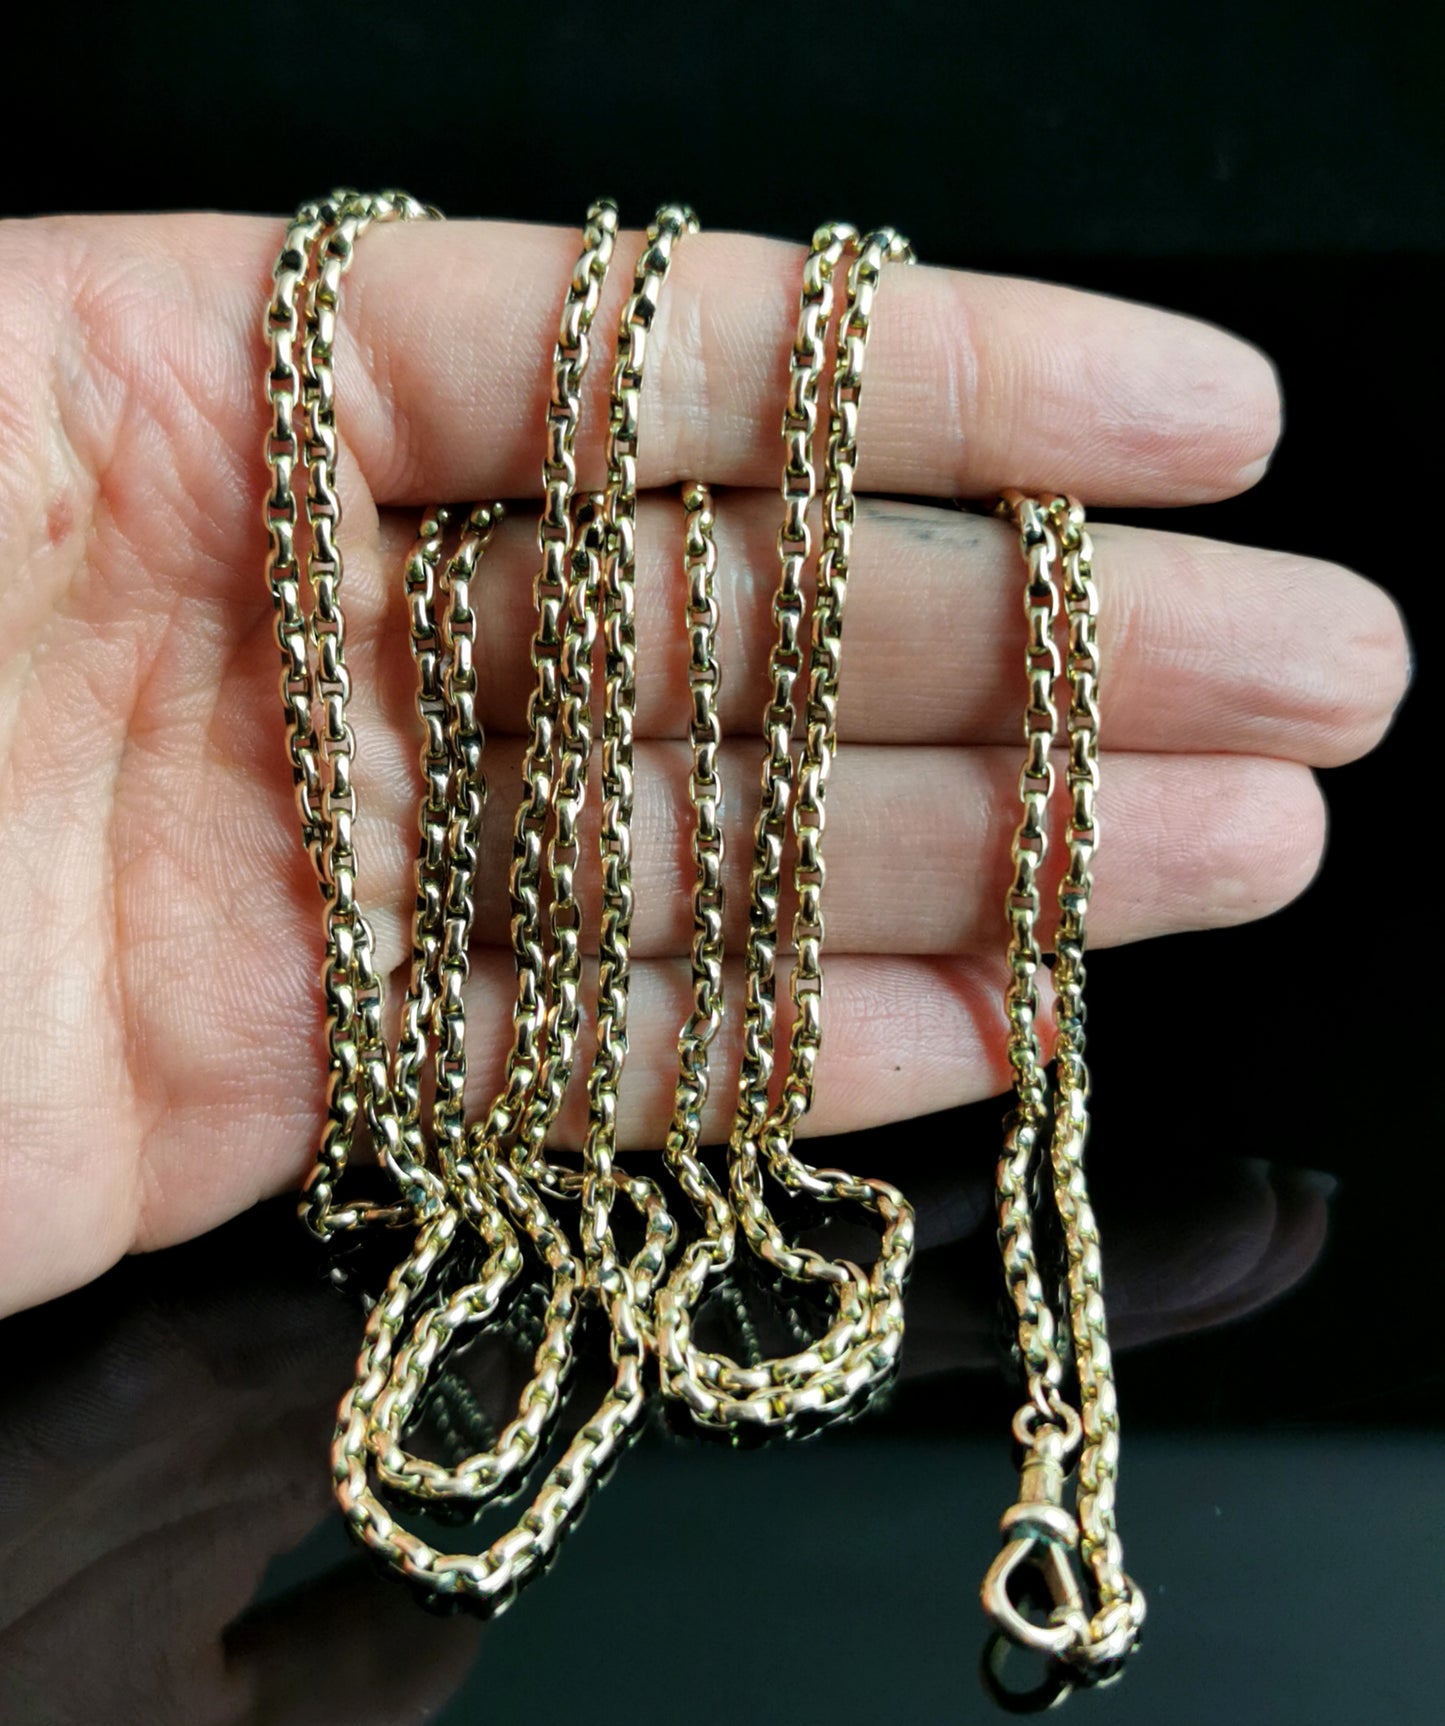 Antique 9ct gold longuard chain necklace, Edwardian, muff chain